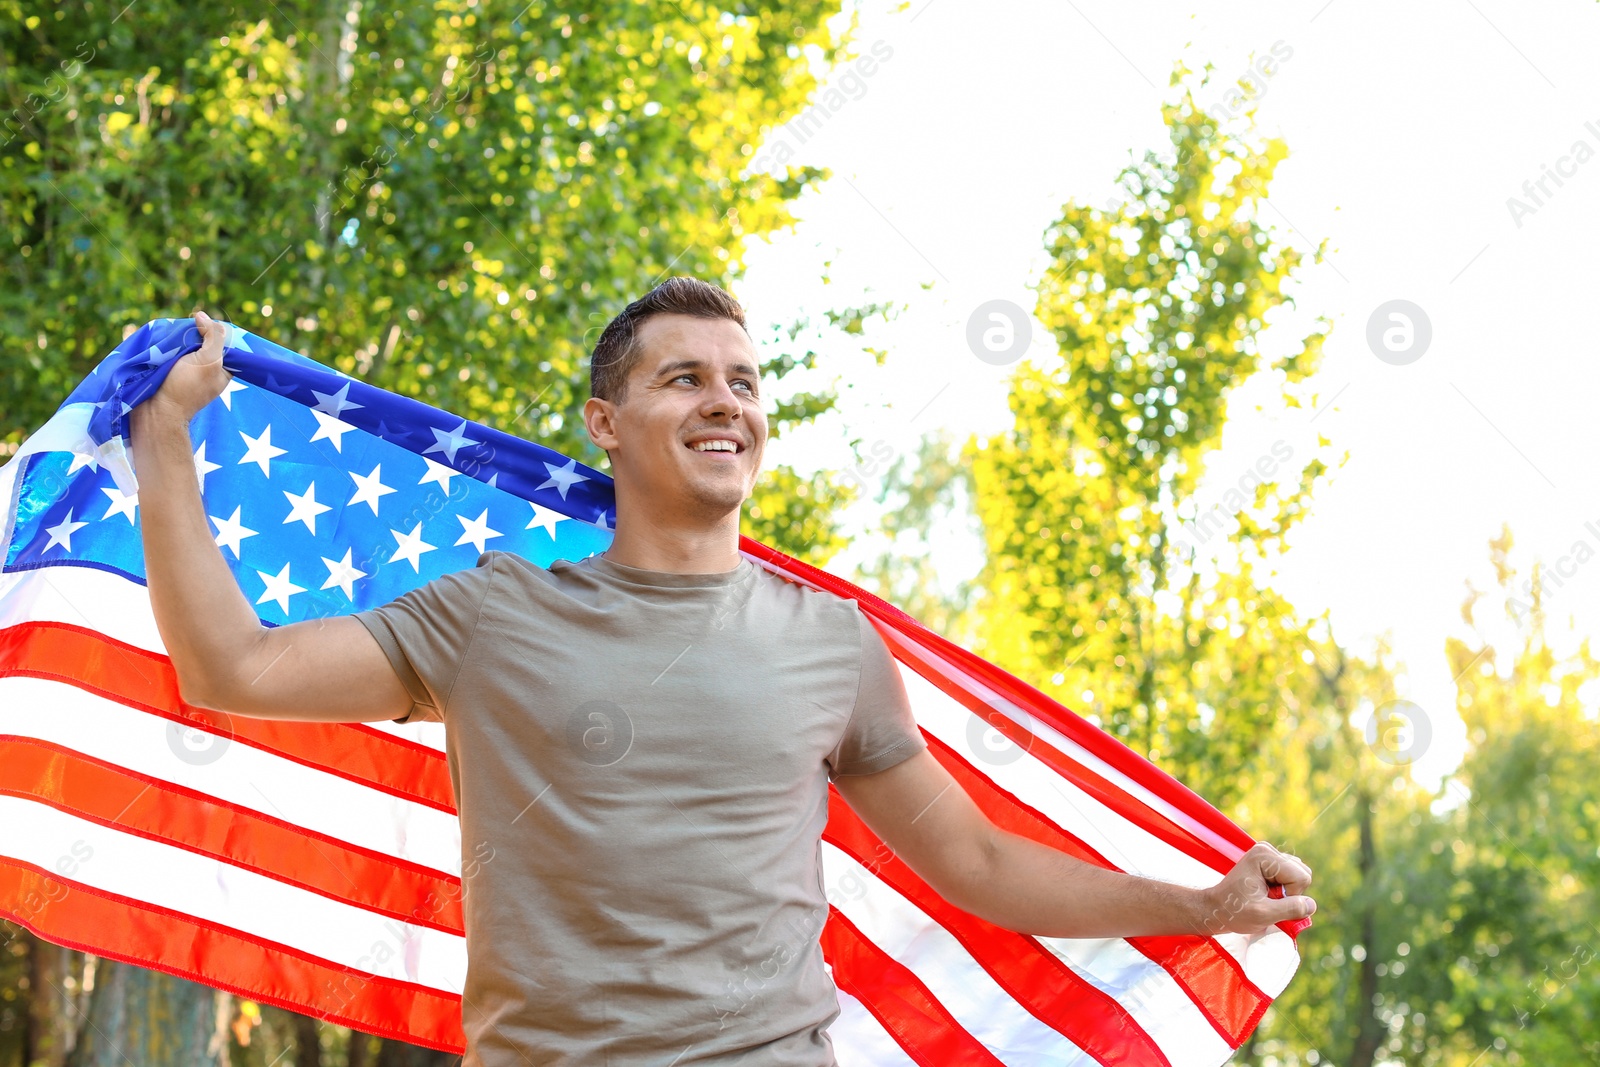 Photo of Man with American flag in park on sunny day